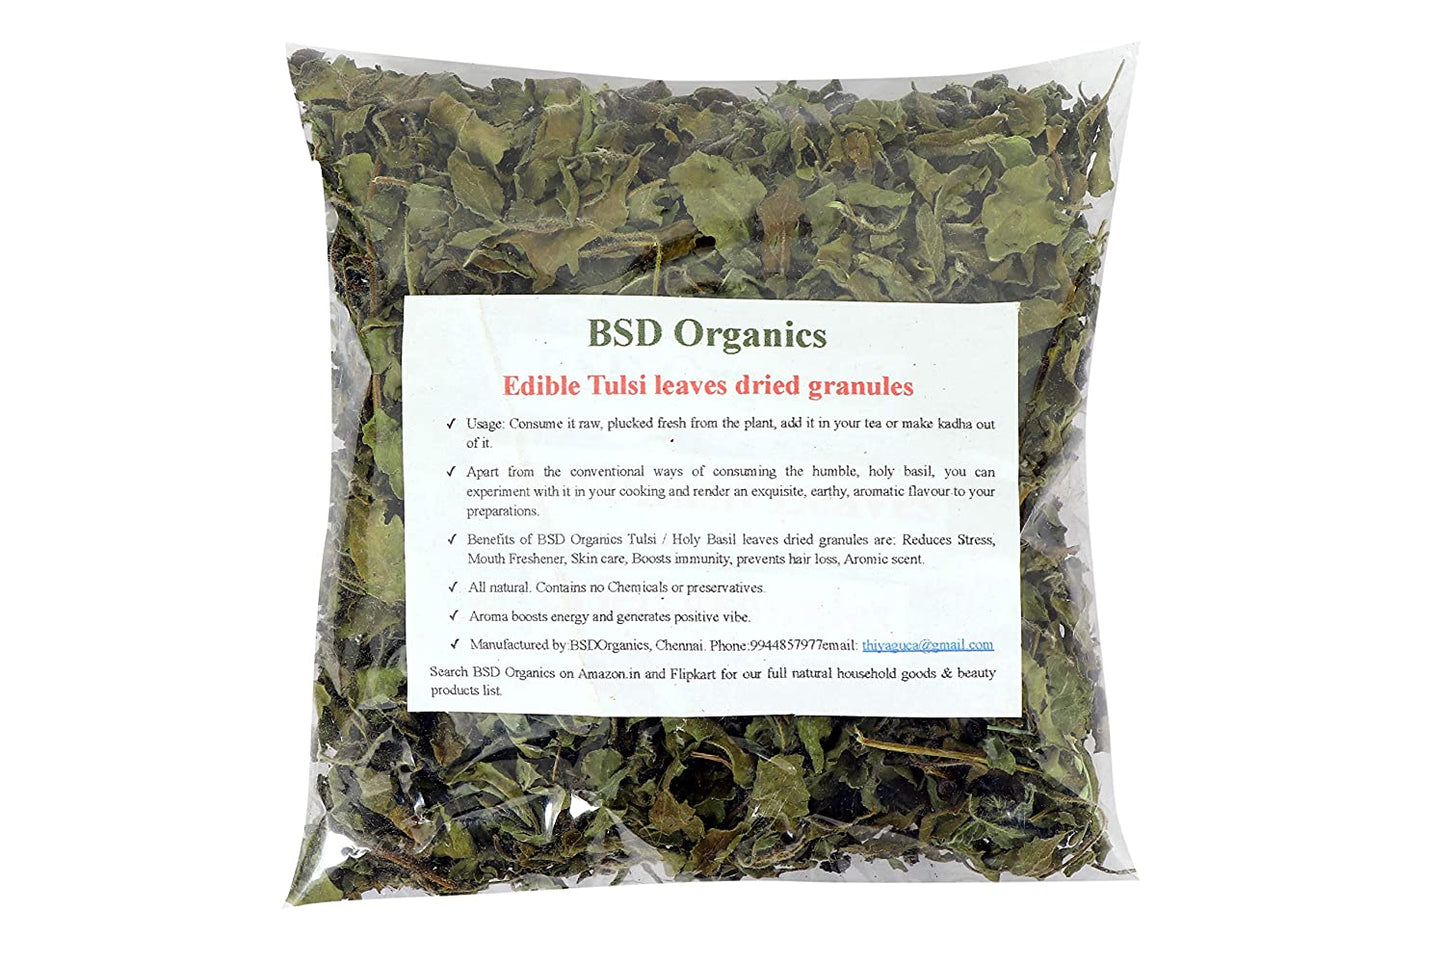 BSD Organics Edible Tulsi leaves dried granules for tea, smoothie & more - 50 gms